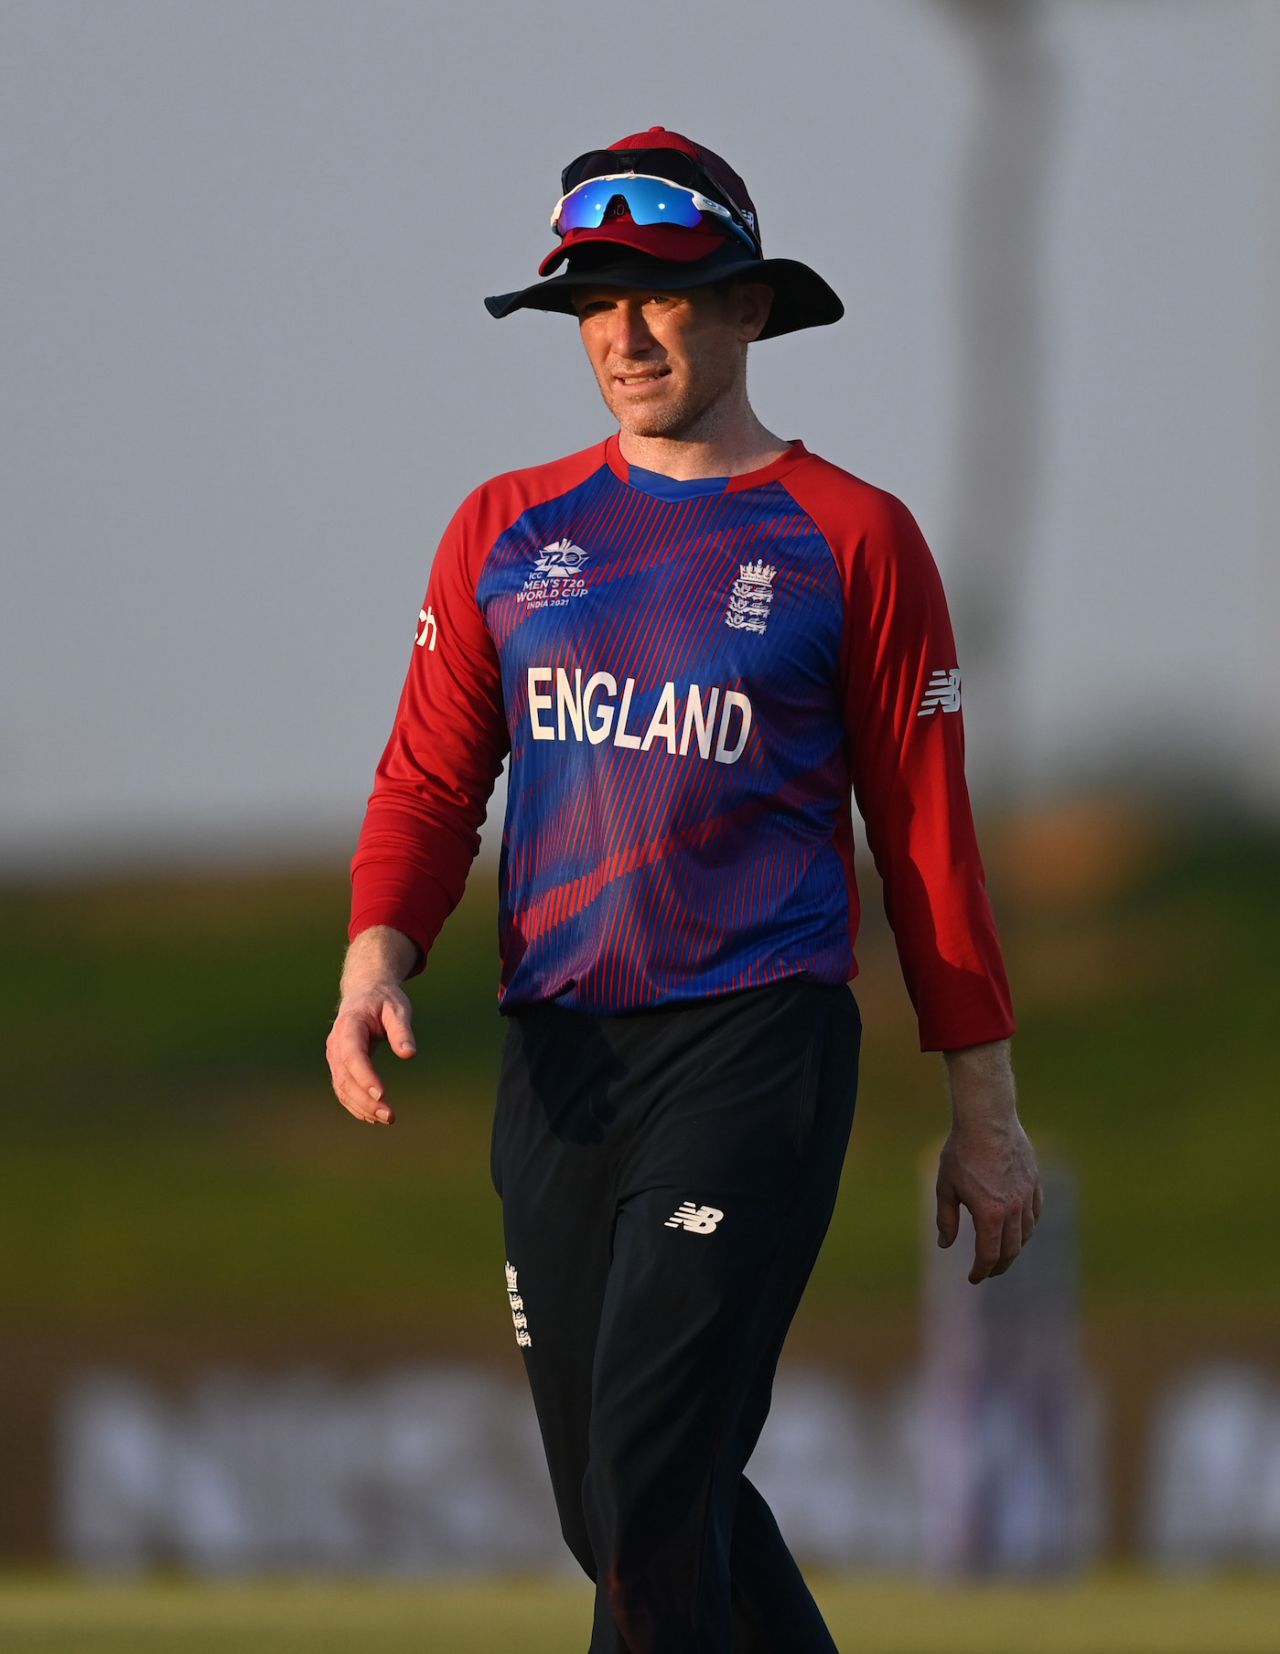 Eoin Morgan in the field, England vs New Zealand, T20 World Cup warm-up, Abu Dhabi, October 20, 2021